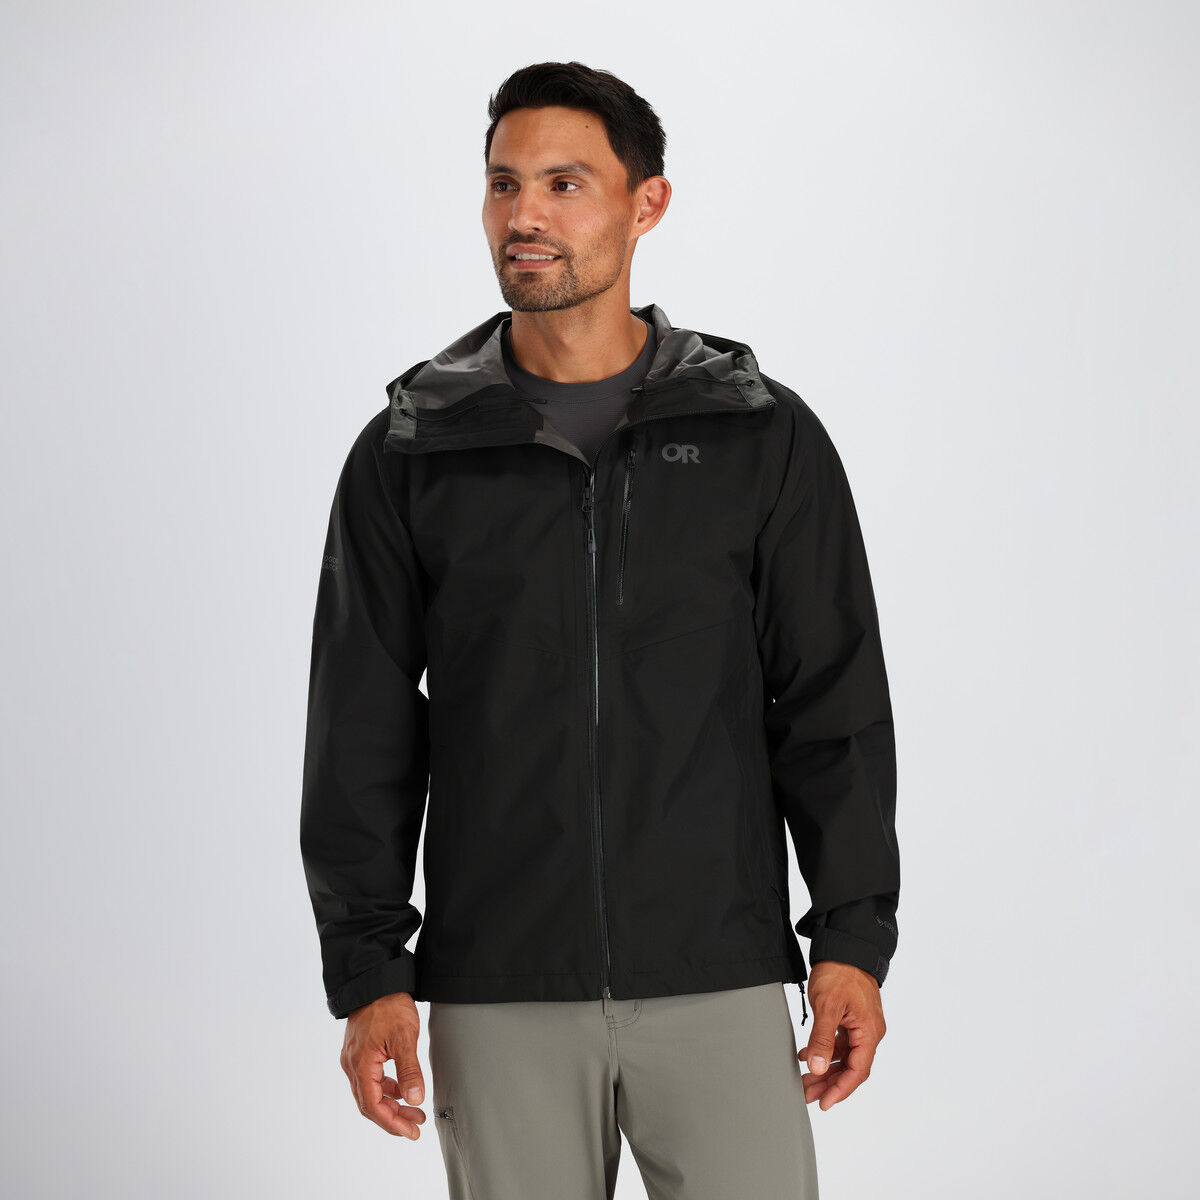 Outdoor Research Foray II Jacket - Chaqueta impermeable - Hombre